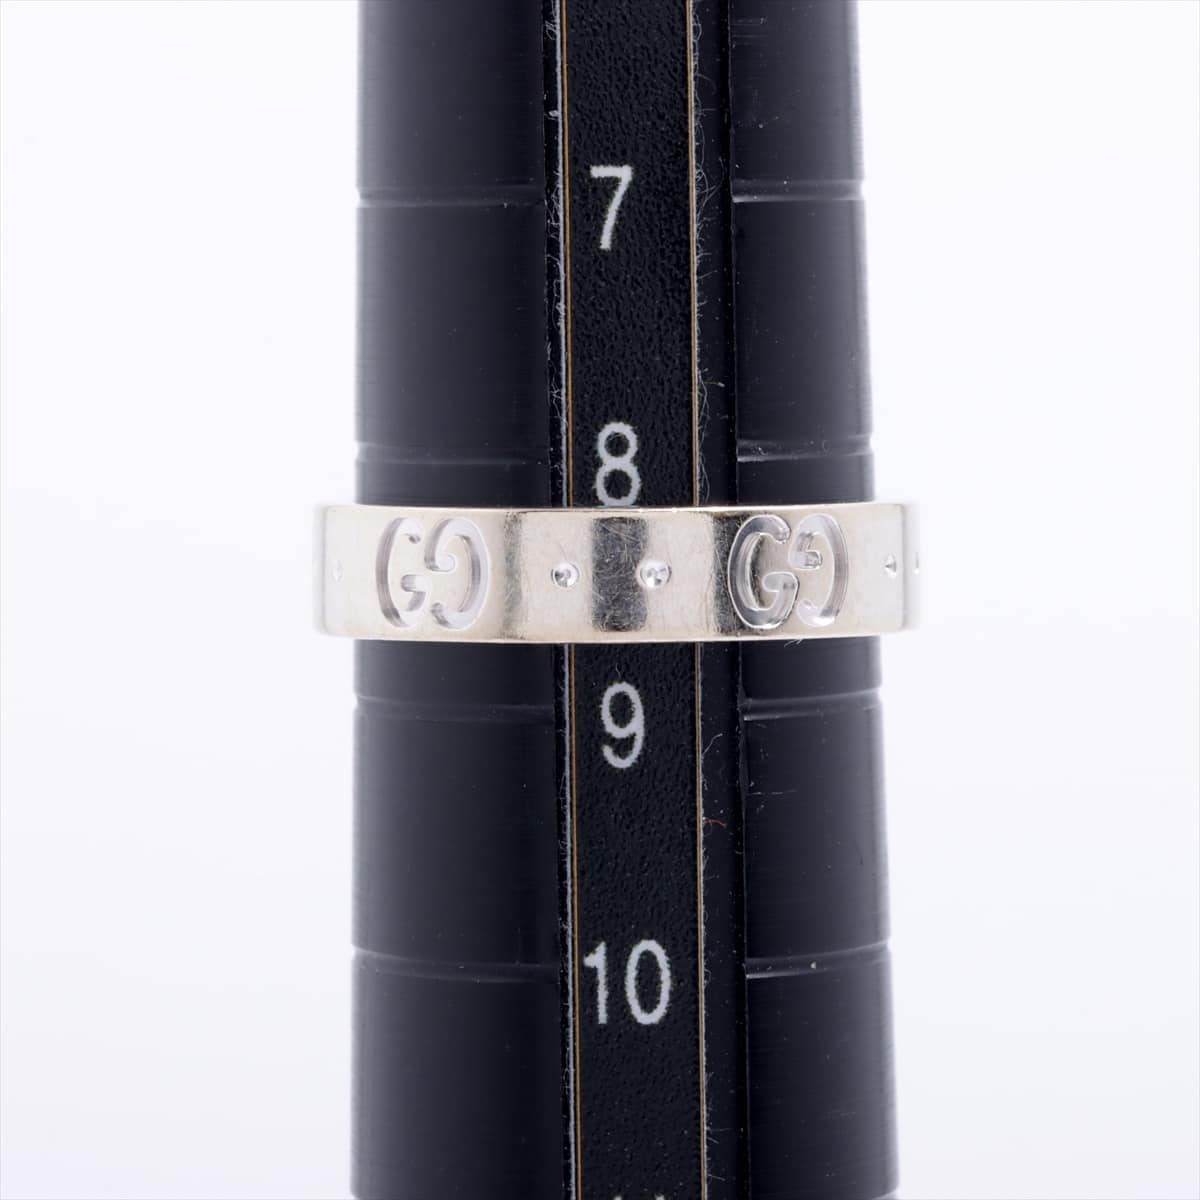 Gucci Icon rings 750 WG 3.4g 9